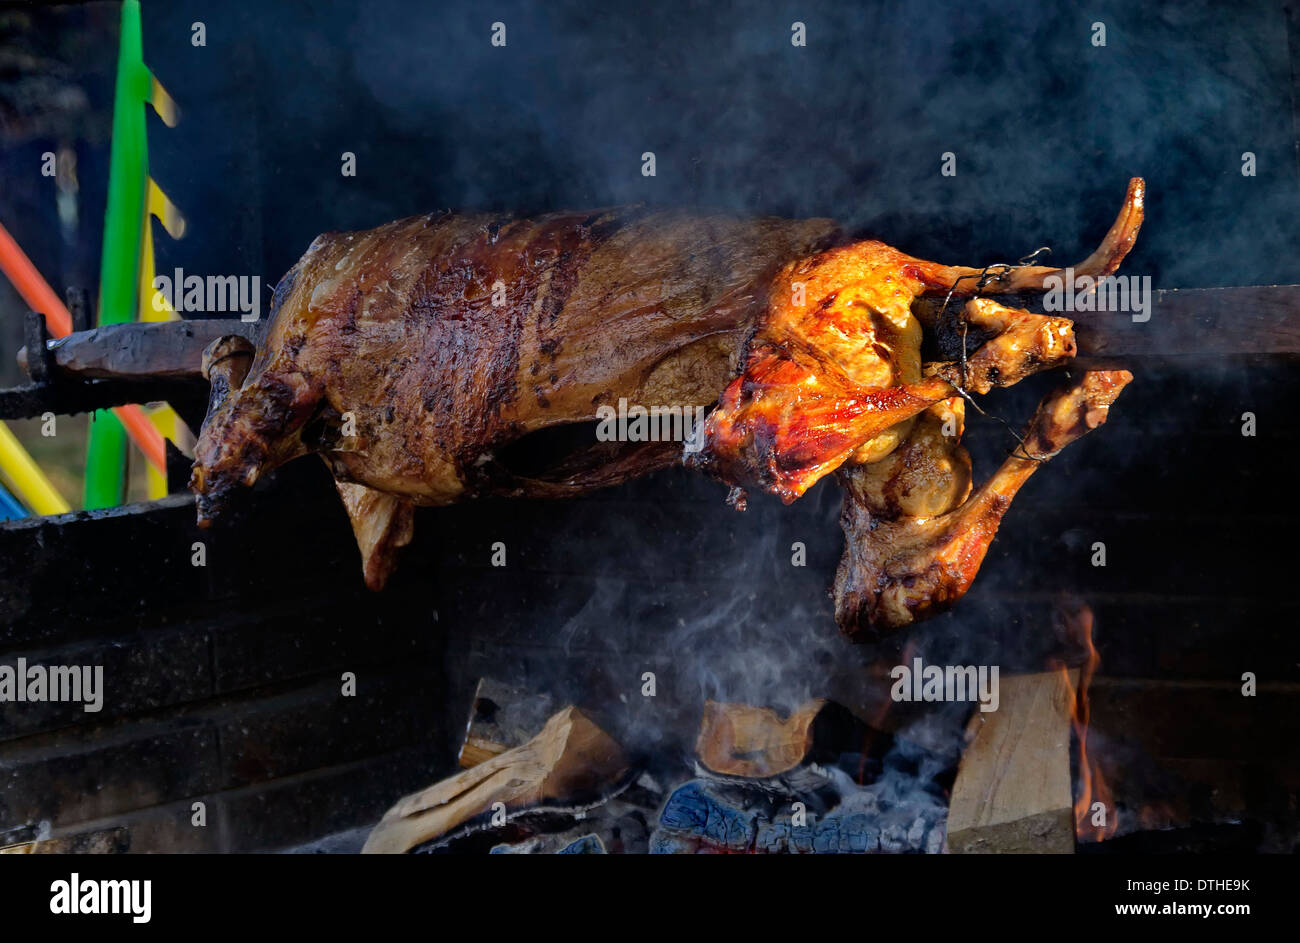 Lamb roasted whole on a spit over open fire in medieval setting Stock Photo